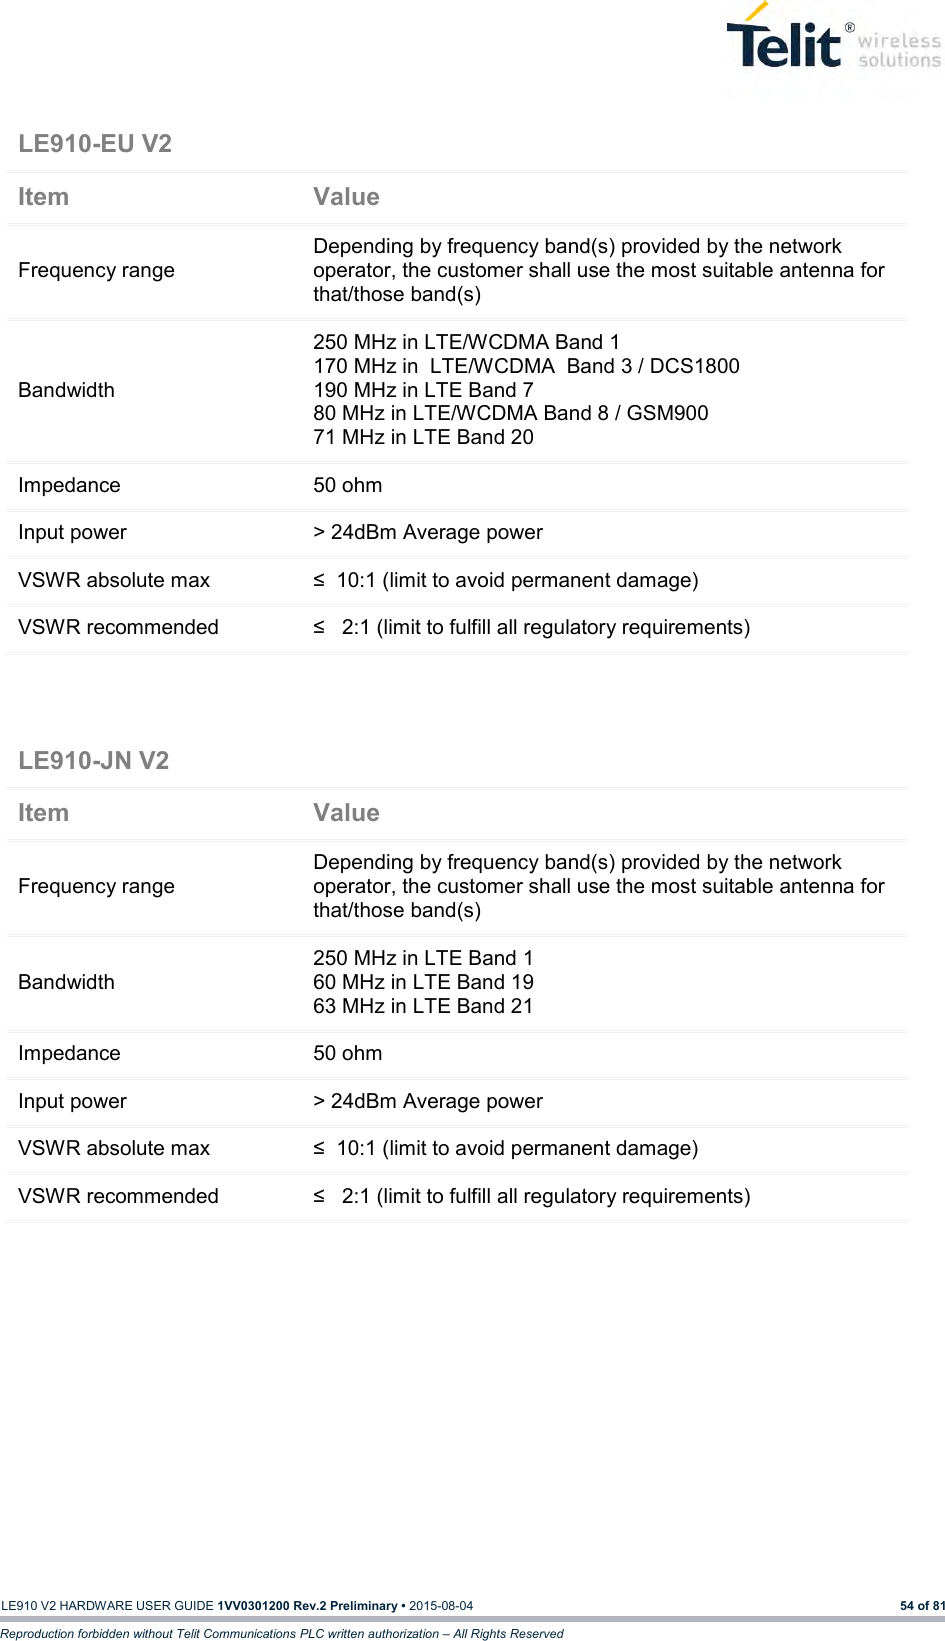   LE910 V2 HARDWARE USER GUIDE 1VV0301200 Rev.2 Preliminary • 2015-08-04 54 of 81 Reproduction forbidden without Telit Communications PLC written authorization – All Rights Reserved     LE910-EU V2  Item Value Frequency range Depending by frequency band(s) provided by the network operator, the customer shall use the most suitable antenna for that/those band(s) Bandwidth 250 MHz in LTE/WCDMA Band 1 170 MHz in  LTE/WCDMA  Band 3 / DCS1800 190 MHz in LTE Band 7 80 MHz in LTE/WCDMA Band 8 / GSM900 71 MHz in LTE Band 20 Impedance 50 ohm Input power &gt; 24dBm Average power VSWR absolute max ≤  10:1 (limit to avoid permanent damage) VSWR recommended ≤   2:1 (limit to fulfill all regulatory requirements) LE910-JN V2  Item Value Frequency range Depending by frequency band(s) provided by the network operator, the customer shall use the most suitable antenna for that/those band(s) Bandwidth 250 MHz in LTE Band 1 60 MHz in LTE Band 19 63 MHz in LTE Band 21 Impedance 50 ohm Input power &gt; 24dBm Average power VSWR absolute max ≤  10:1 (limit to avoid permanent damage) VSWR recommended ≤   2:1 (limit to fulfill all regulatory requirements) 